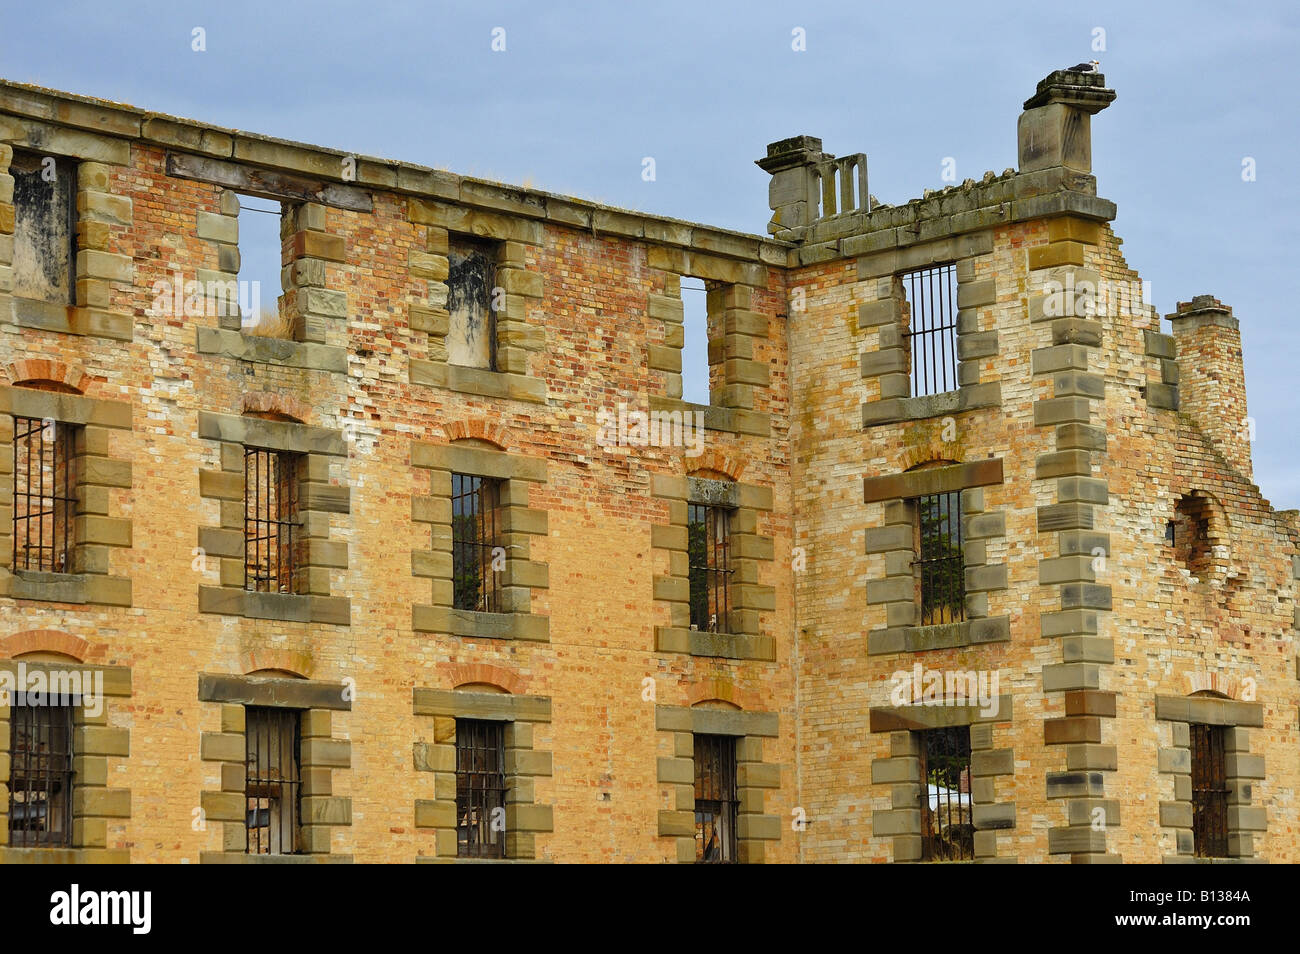 Ruins of the penitentiary building at Port Arthur Stock Photo